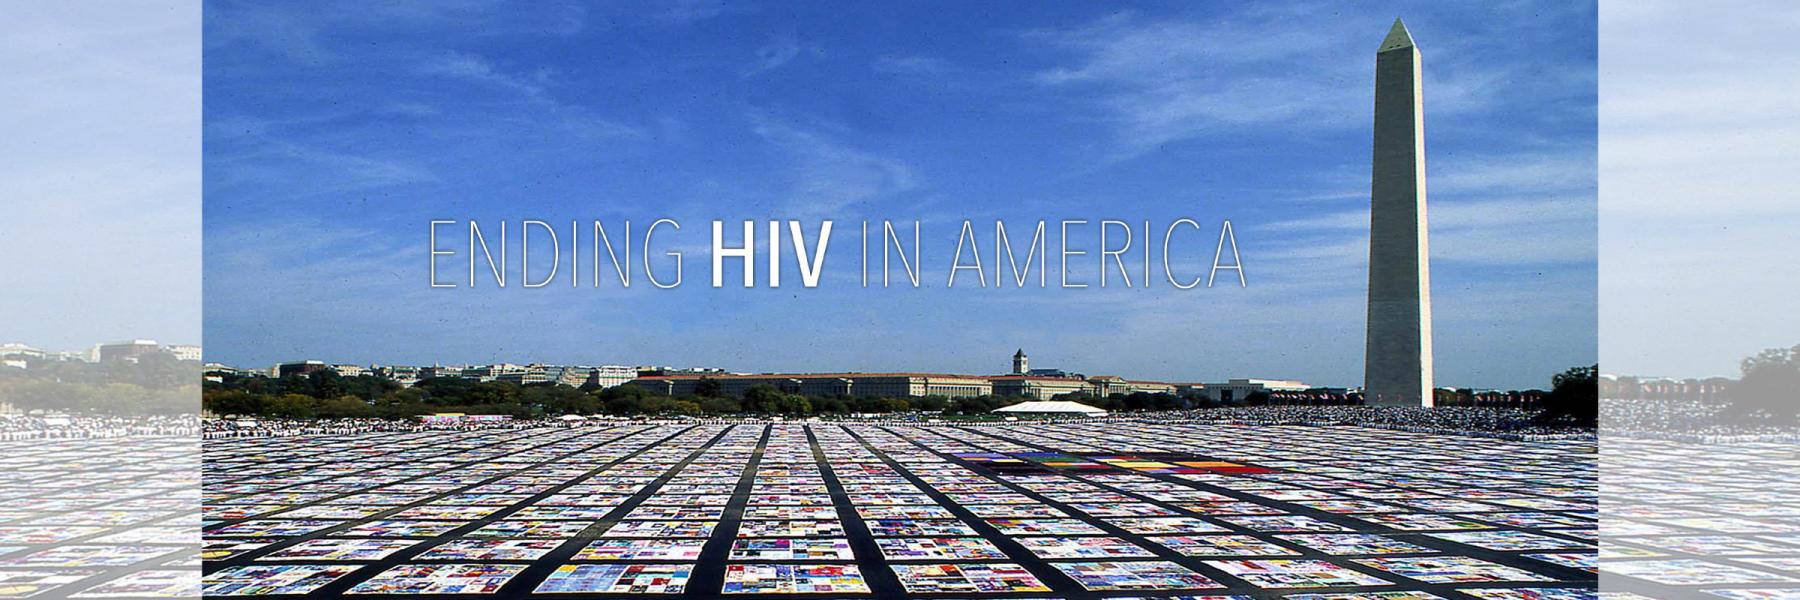 picture of the AIDS Quilt on display at the National Mall in Washington, D.C.